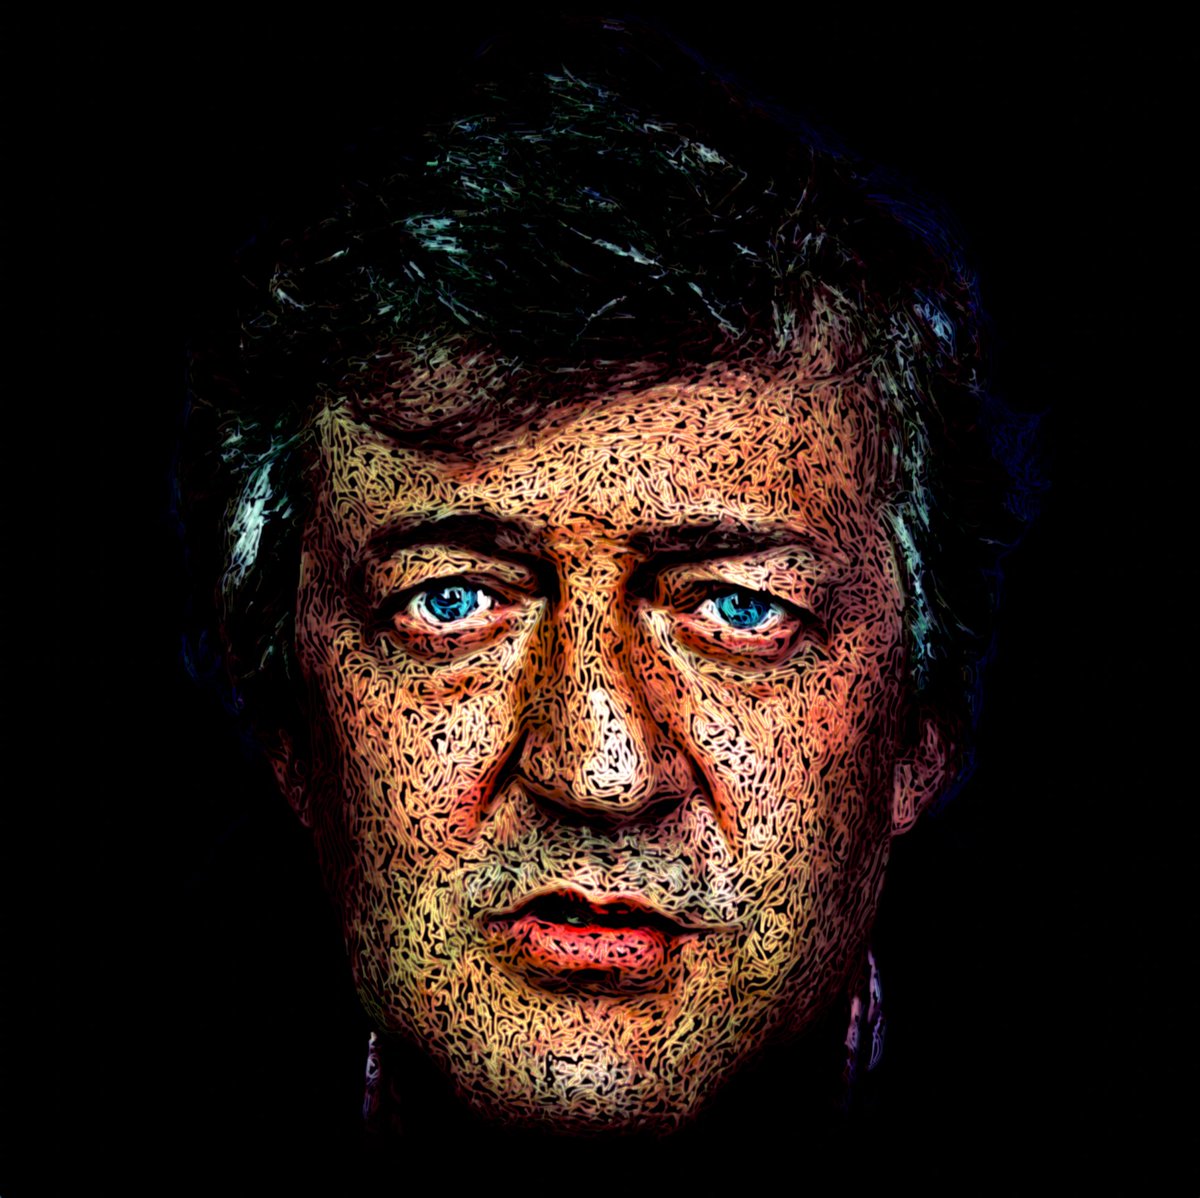 Robot Light Drawing Stephen Fry Date 7th May 2023 Exposure time 03:08:28 A still photograph taken with a long exposure from a fixed camera position, capturing our robot drawing in a dark space with light. Using AI and over 130,000 lines of bespoke code a photograph is turned